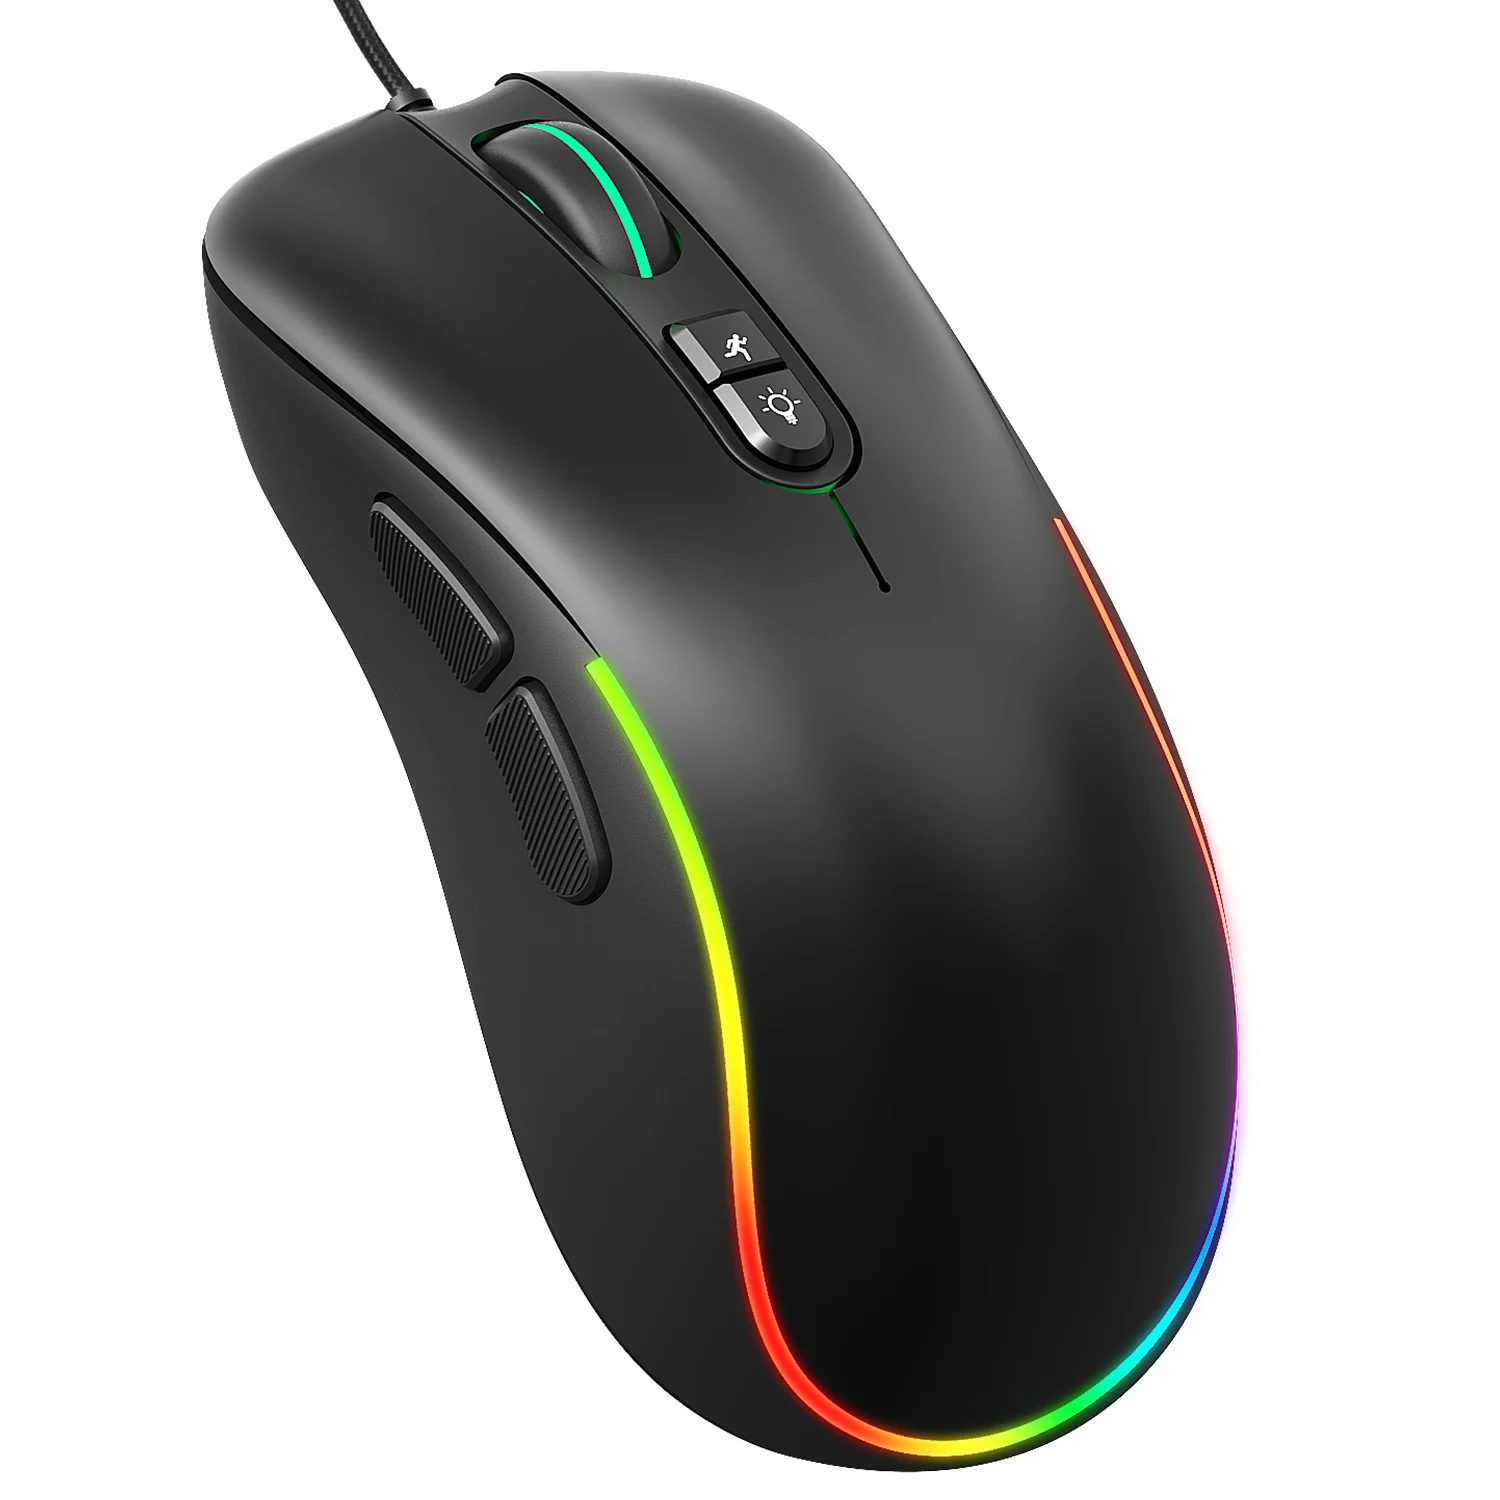 

J300 RGB Lighting Programmable Gaming Mouse Wired Mouse Adjustable DPI 1000/1600/2400/3200/4800/6400